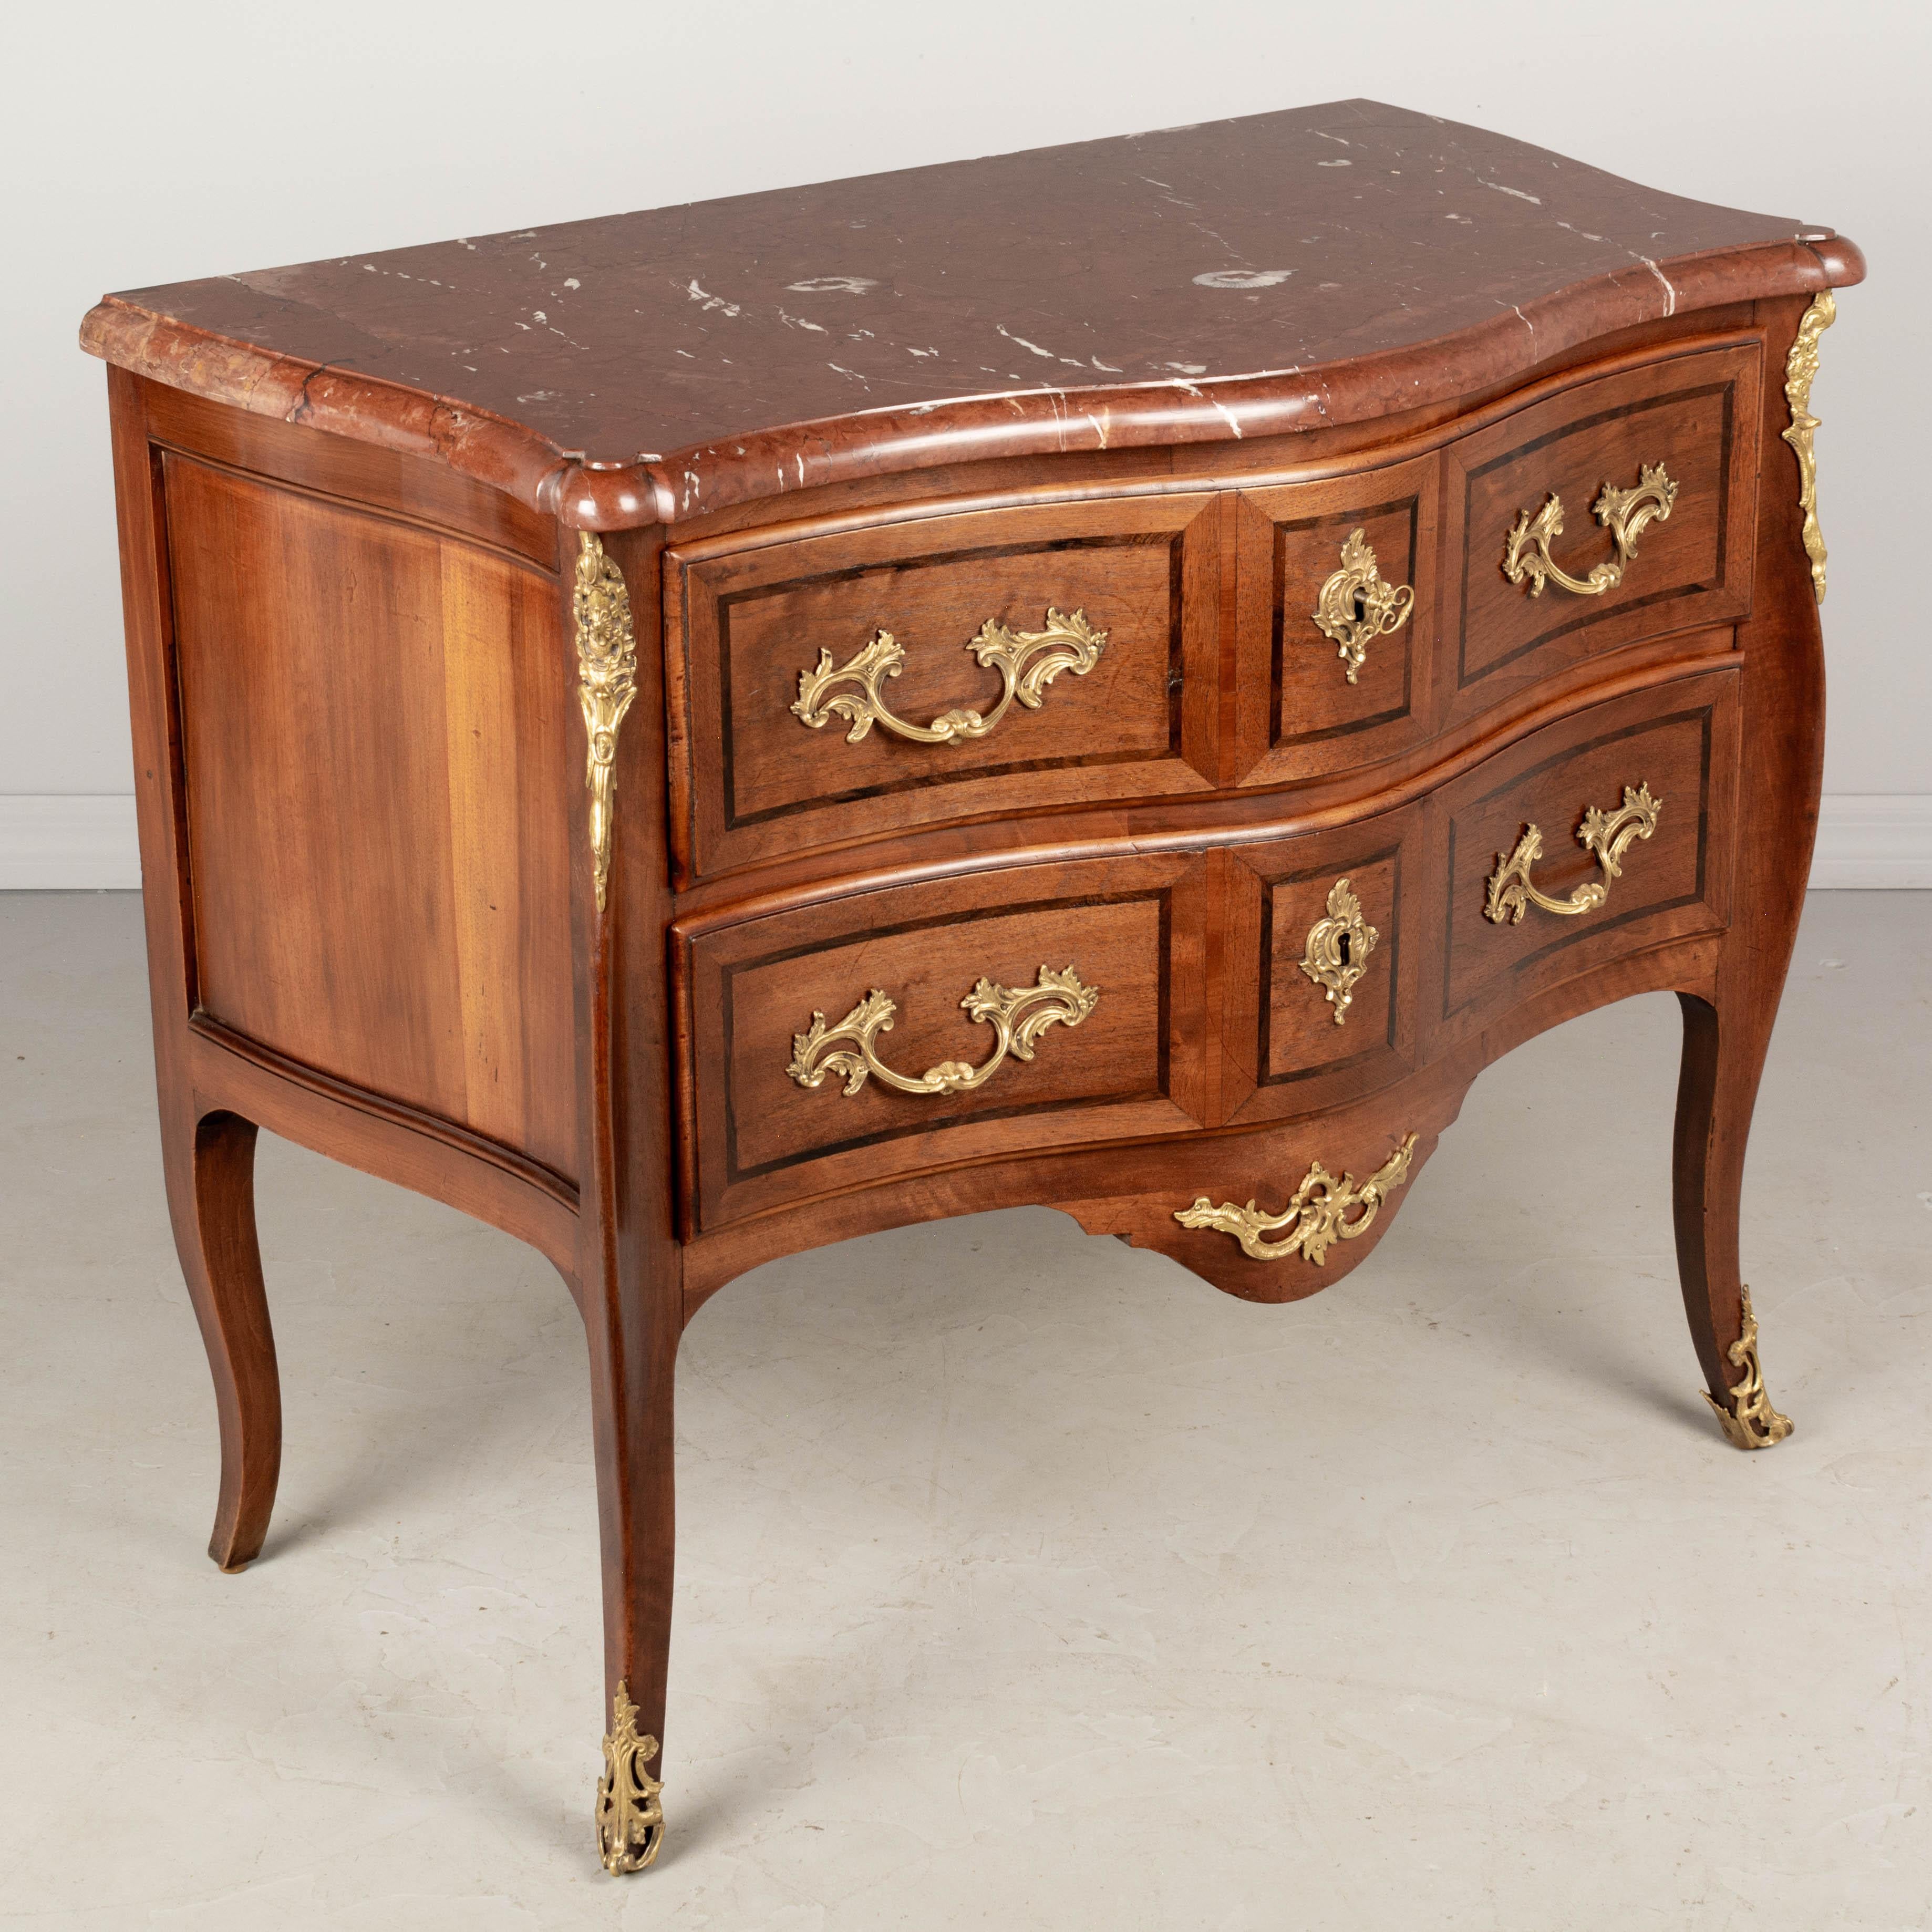 An early 20th century French Louis XV style bronze mounted marble top marquetry commode, finely crafted of solid walnut with rosewood inlay. Two dovetailed drawers with working locks and one key. Elegant serpentine form and slender cabriole legs.